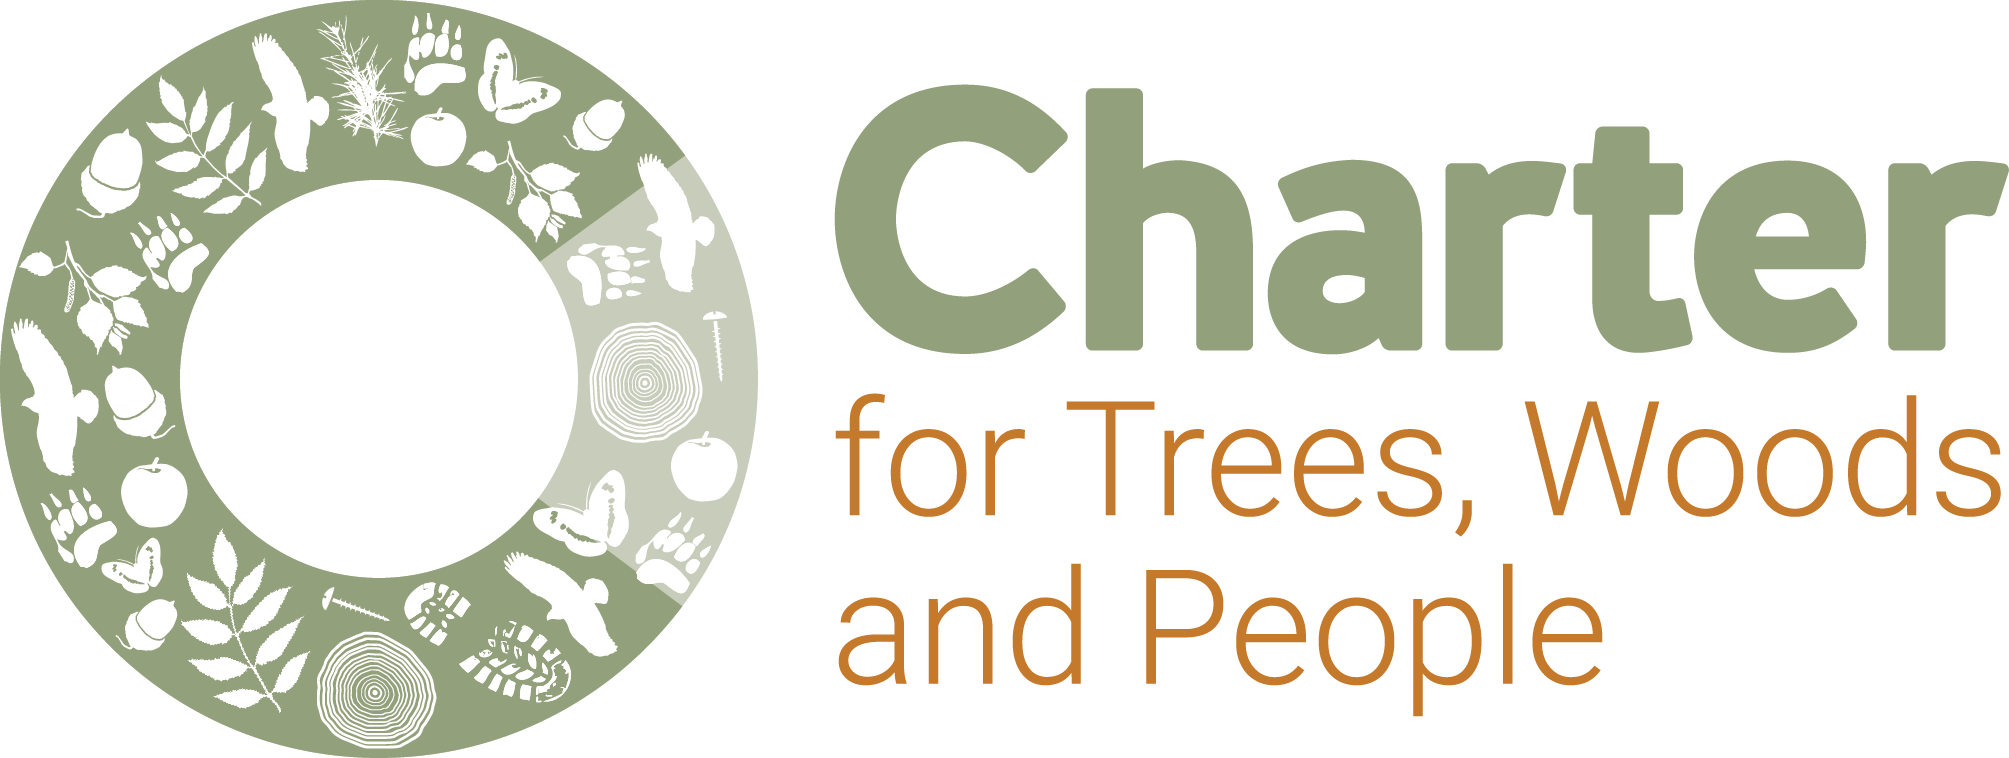 tree charter logo of a green circle with leaves and animal symbols within it. Text reads: Charter for trees, woods and people